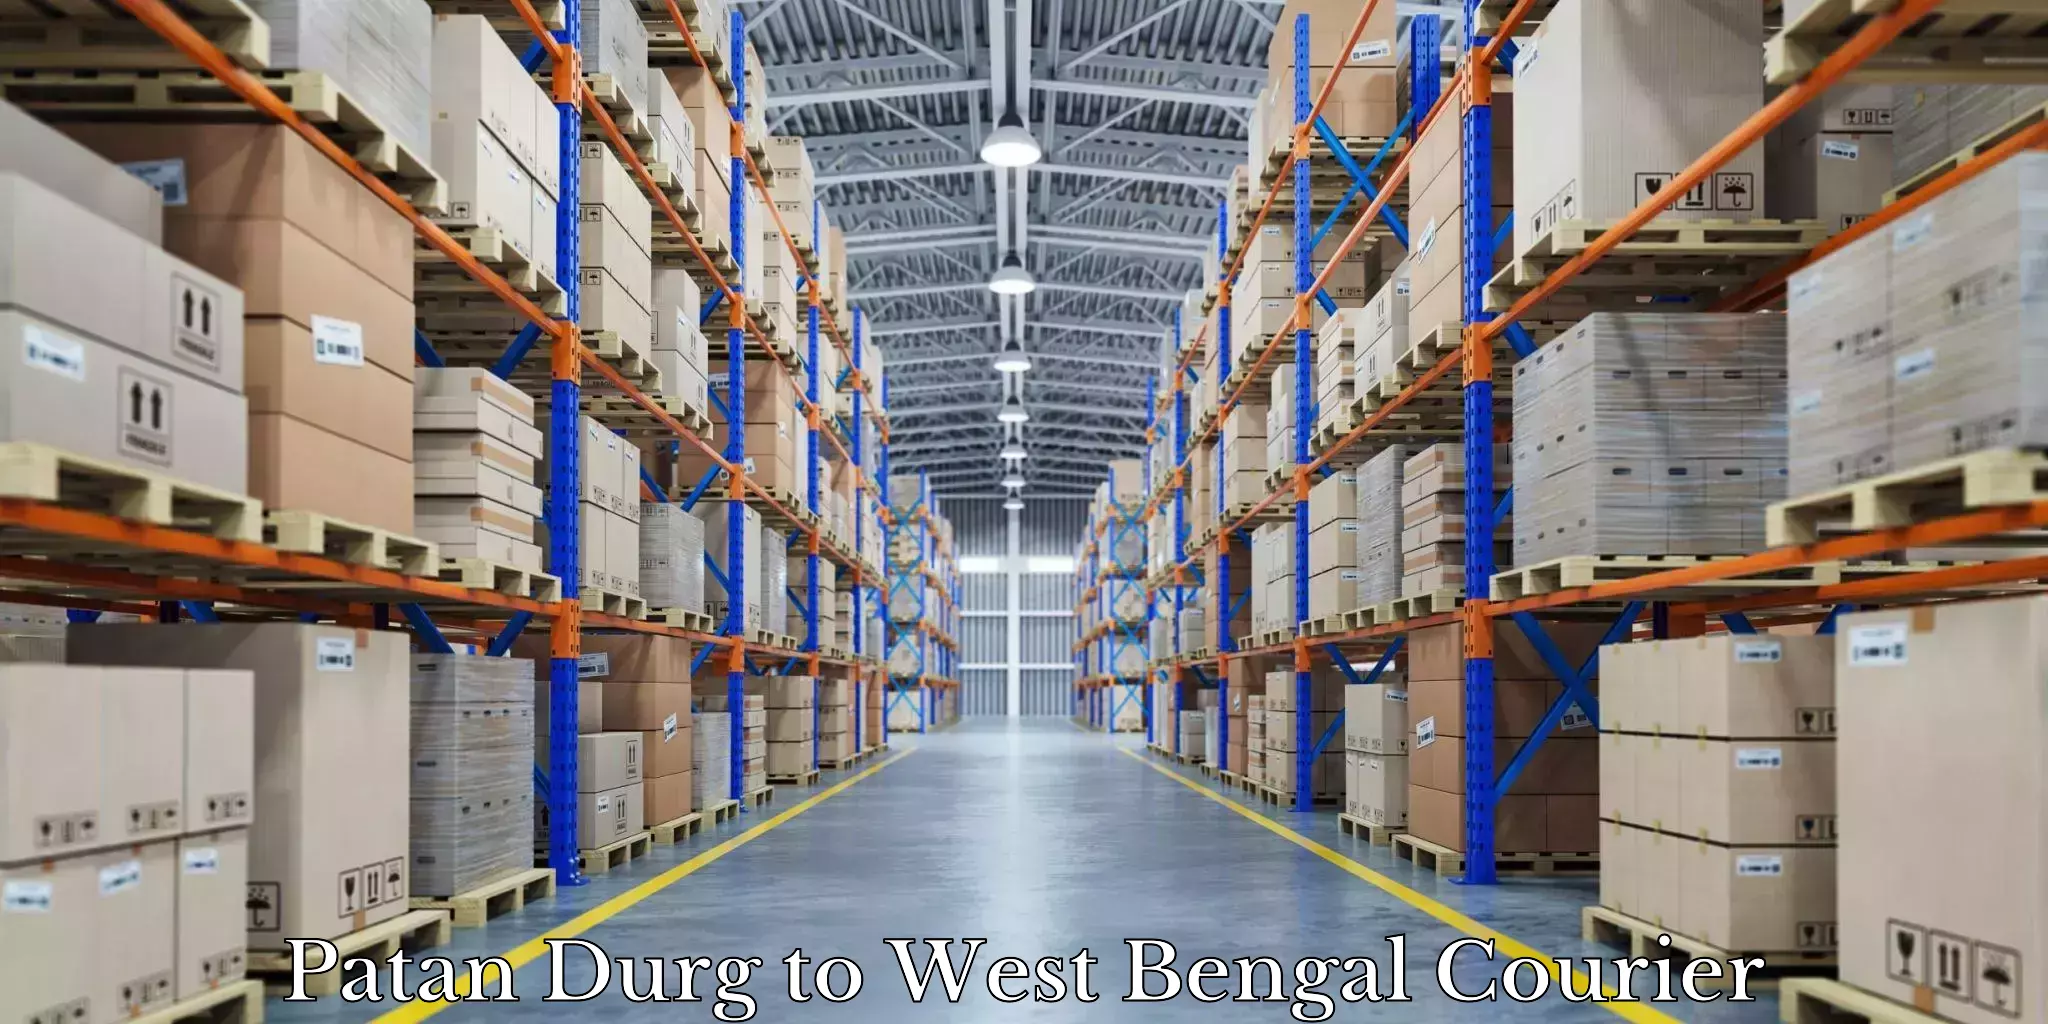 Furniture transport and storage Patan Durg to West Bengal